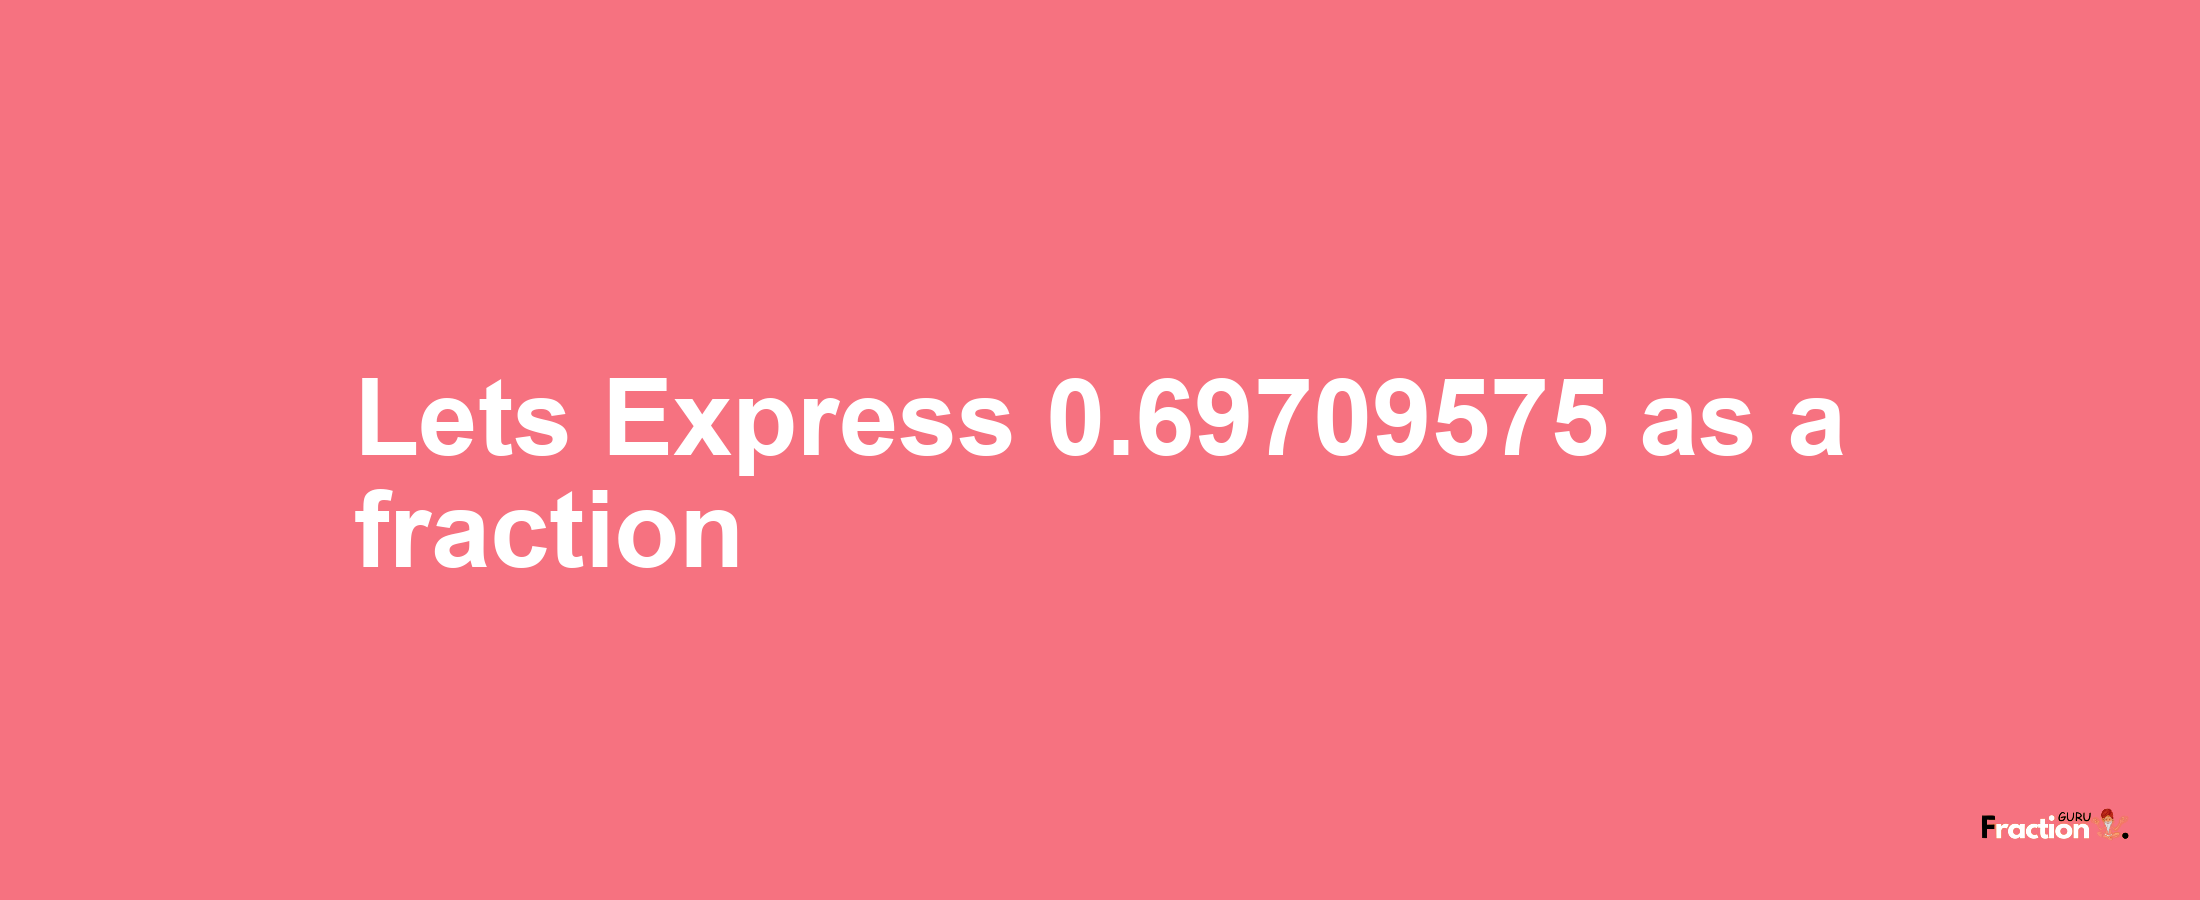 Lets Express 0.69709575 as afraction